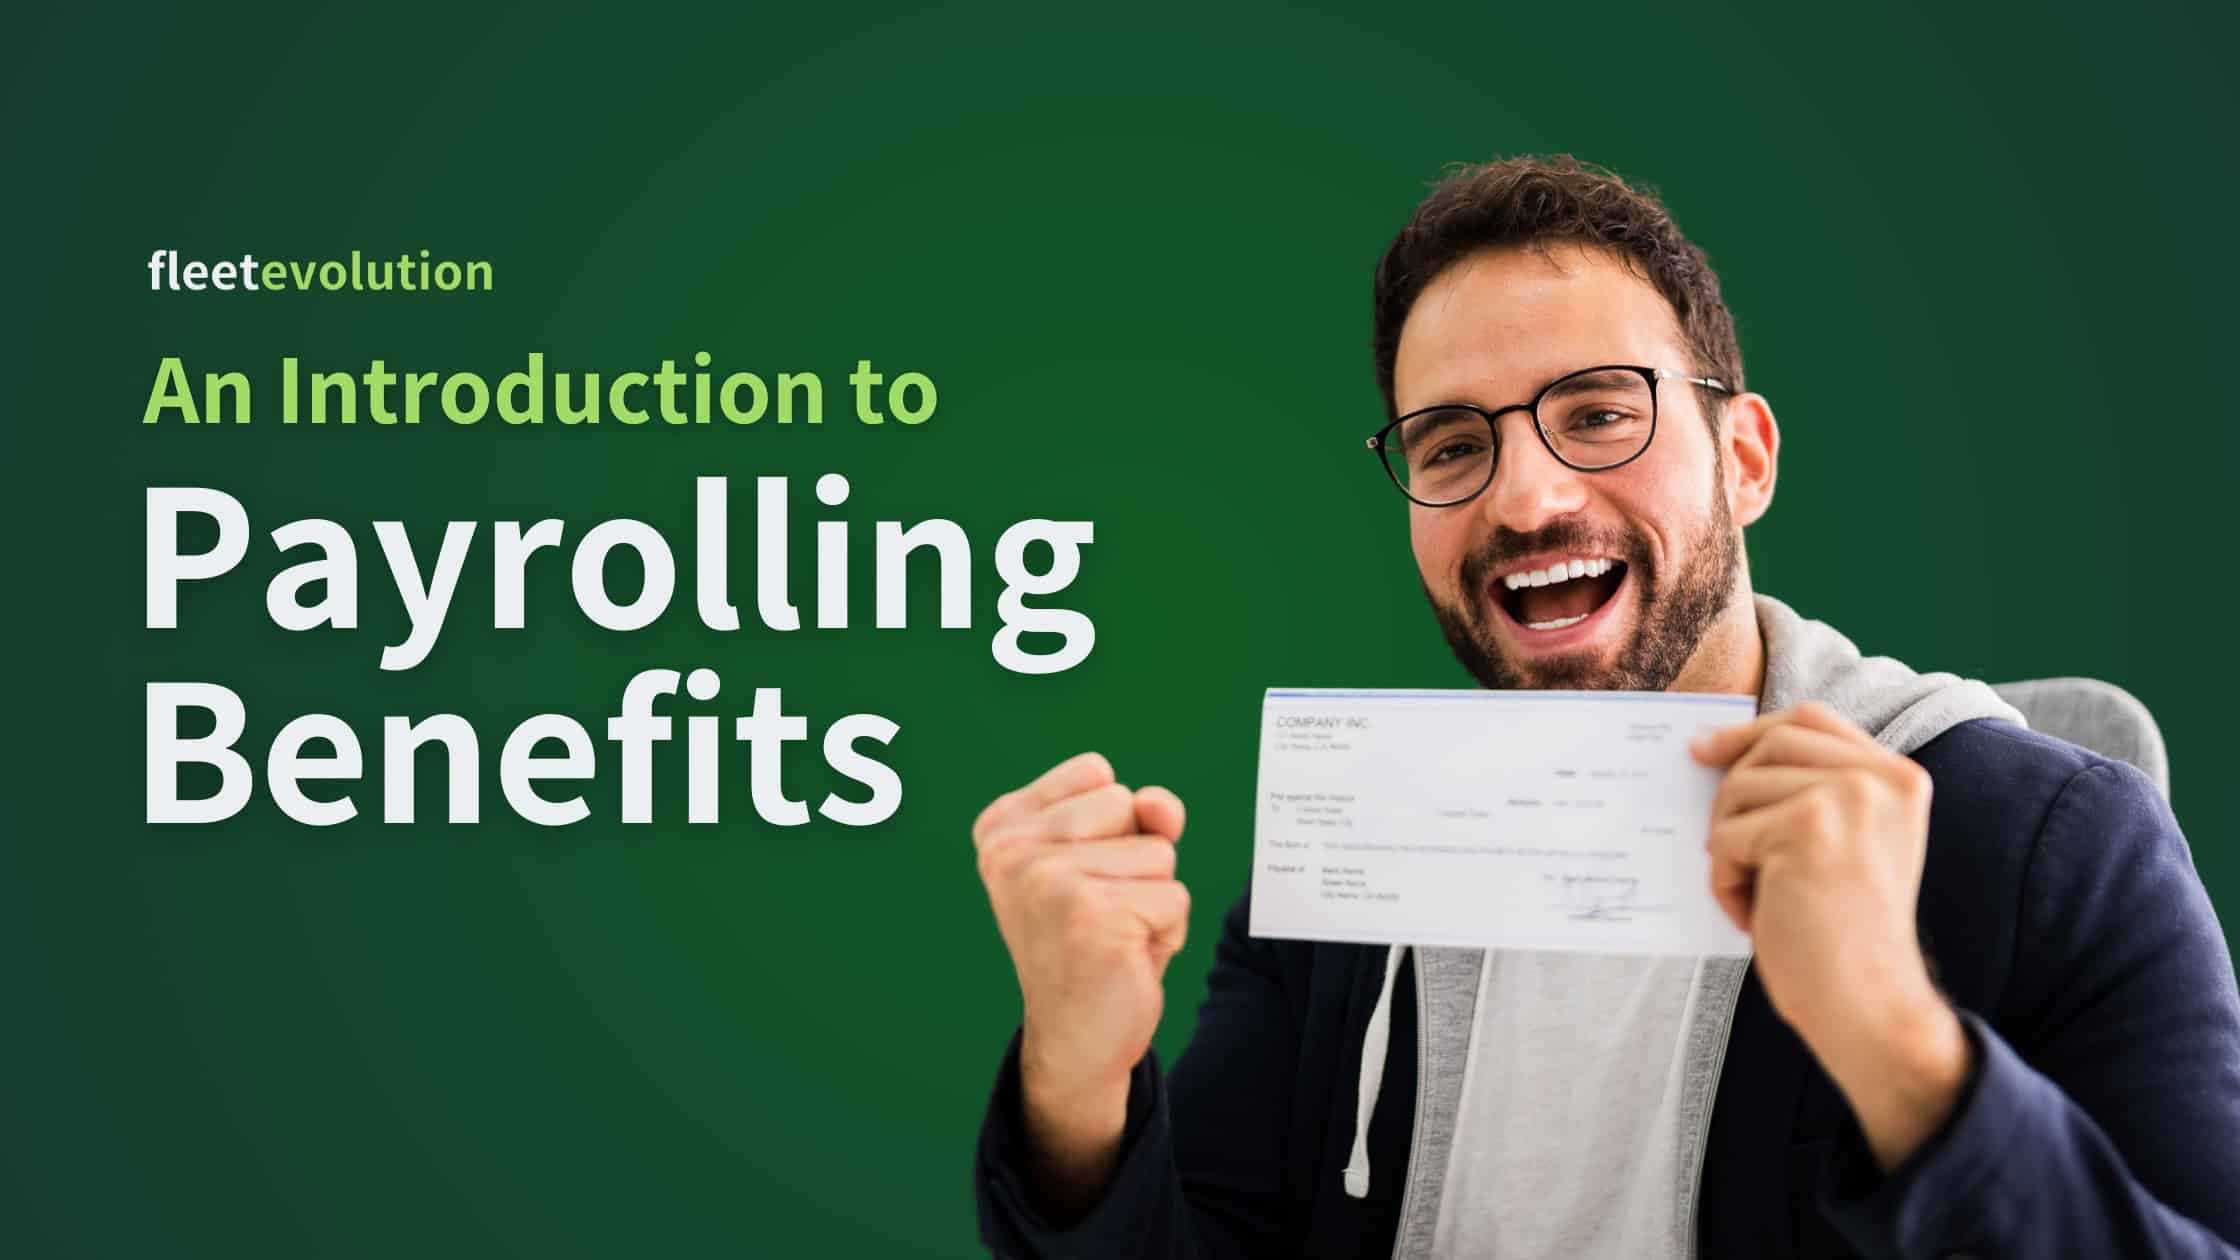 An Introduction to Payrolling Benefits